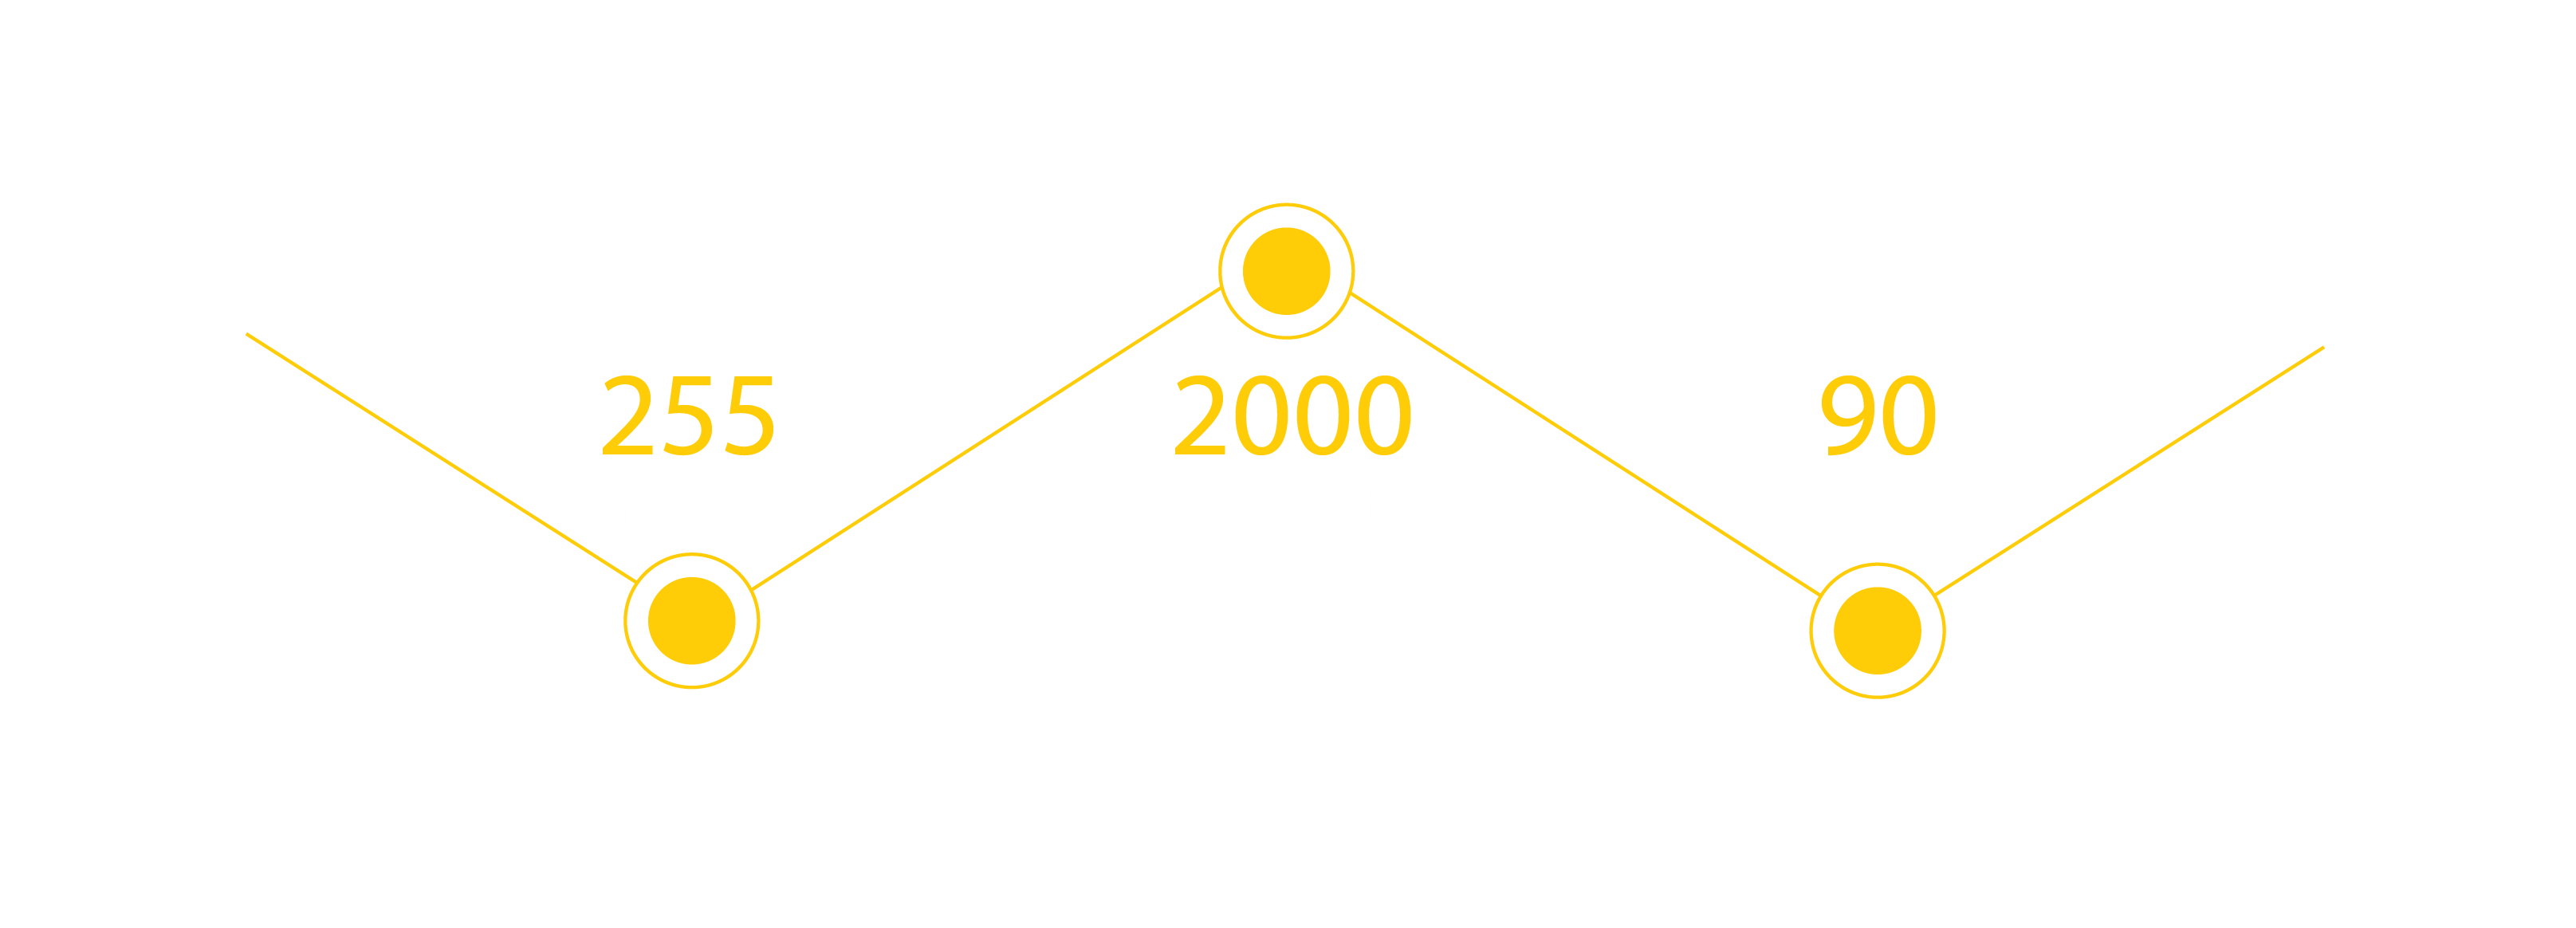 Three yellow circles on a zig-zag yellow line. The first circle is labeled "255 projects," the second "2000 students," the third "90 sponsors."